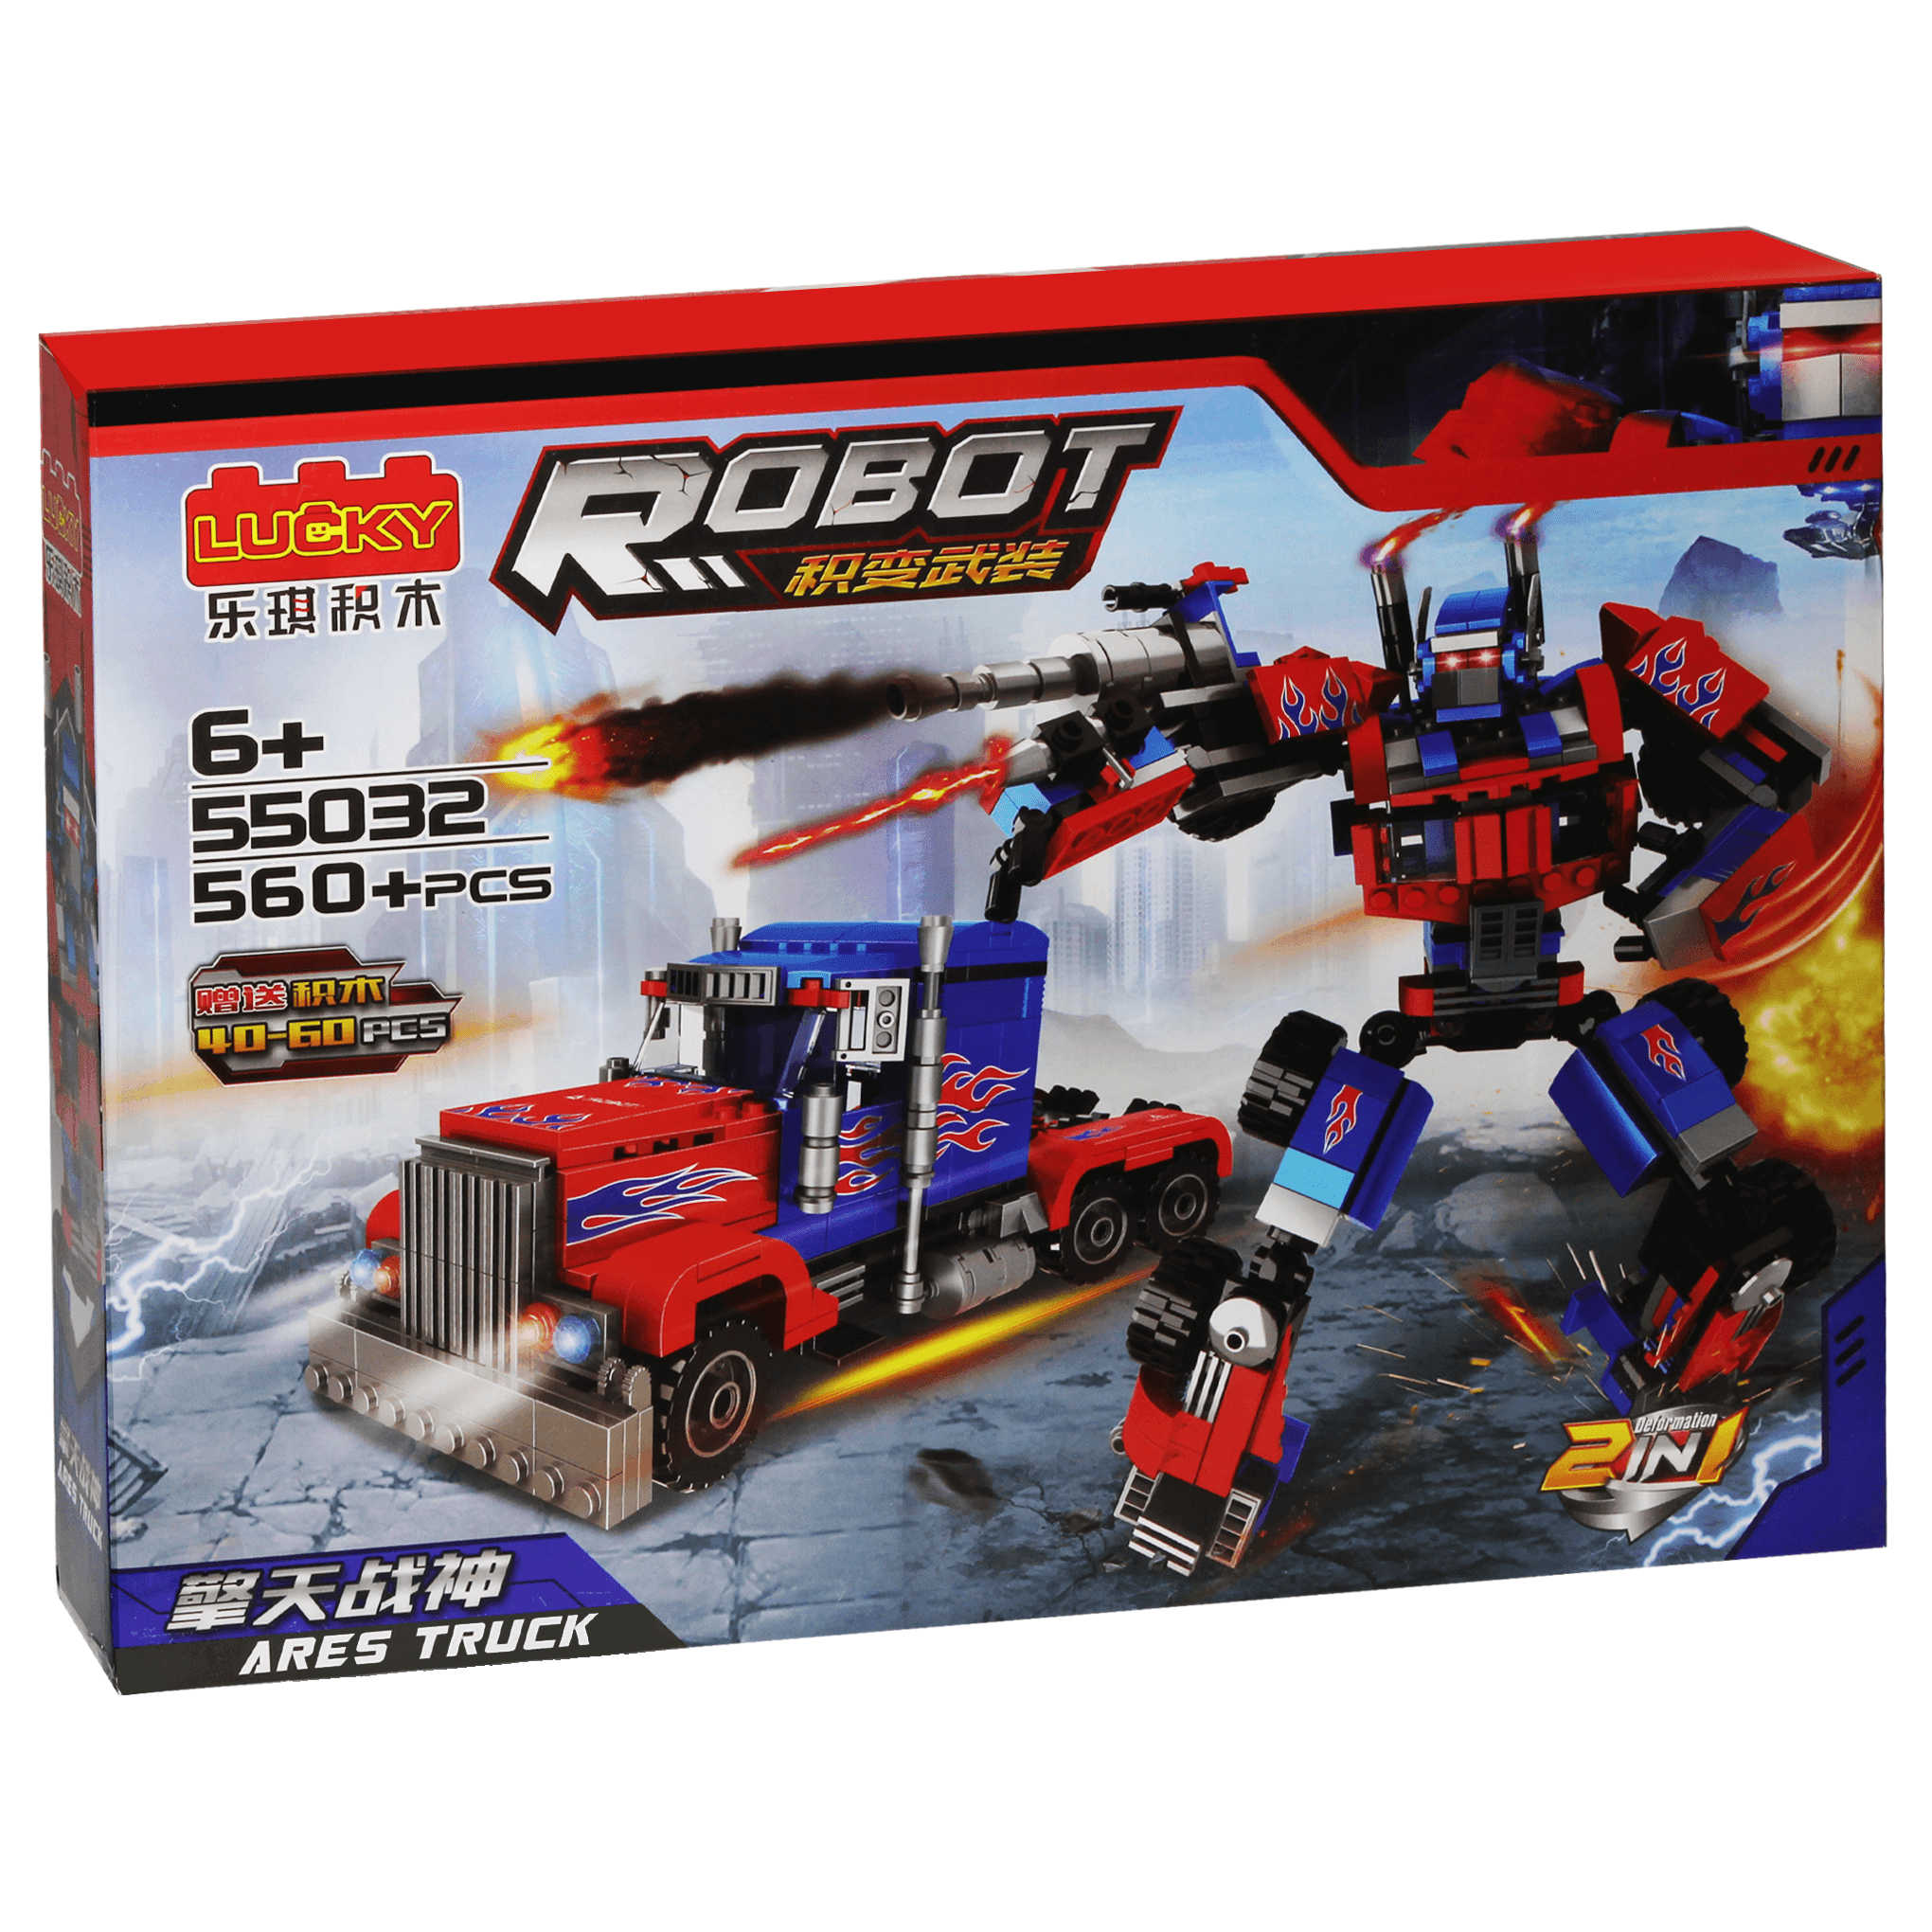 Lucky 55032 2 In 1 Transoformers Optimus Prime Robot and Car Building Kit (560 Pcs) - BumbleToys - 14 Years & Up, 18+, Boys, Building Sets & Blocks, Creator, LEGO, Rocket Raccoon, Toy Land